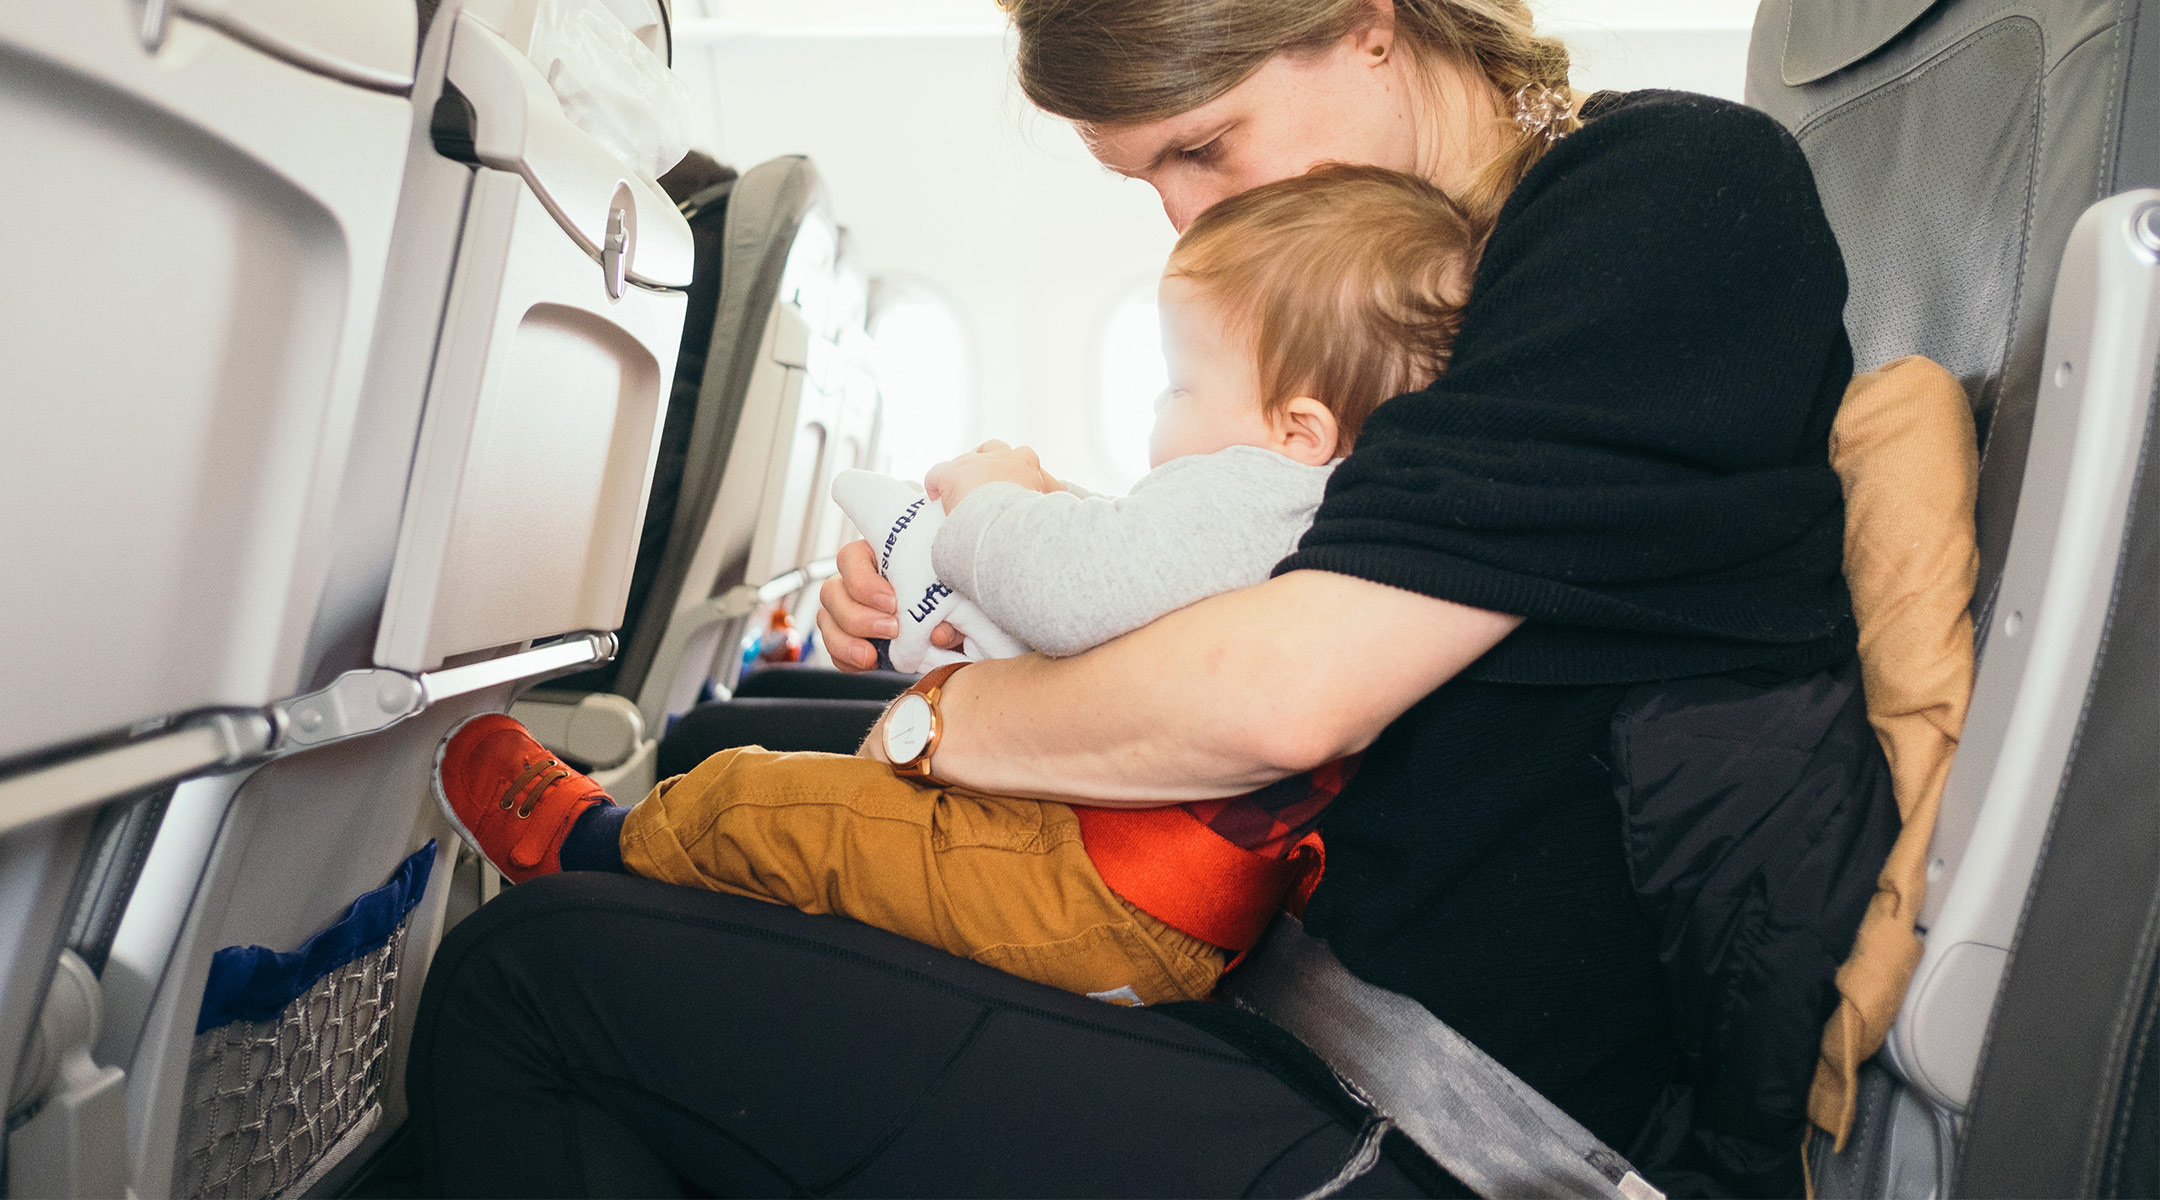 mom on airplane sitting with her baby